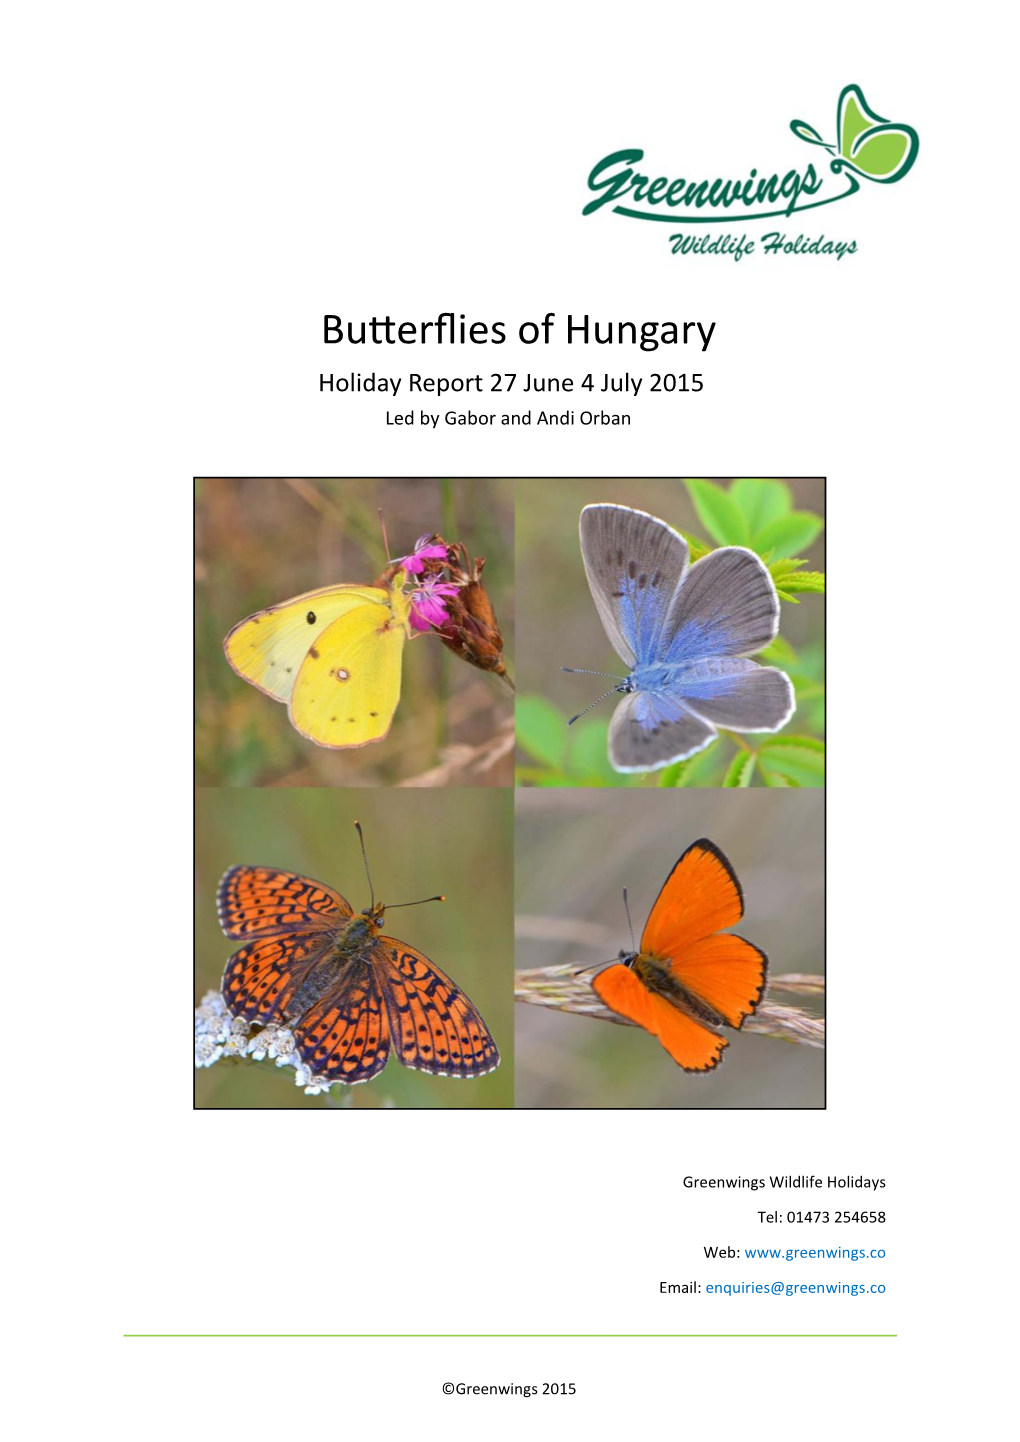 Butterflies of Hungary Holiday Report 27 June 4 July 2015 Led by Gabor and Andi Orban